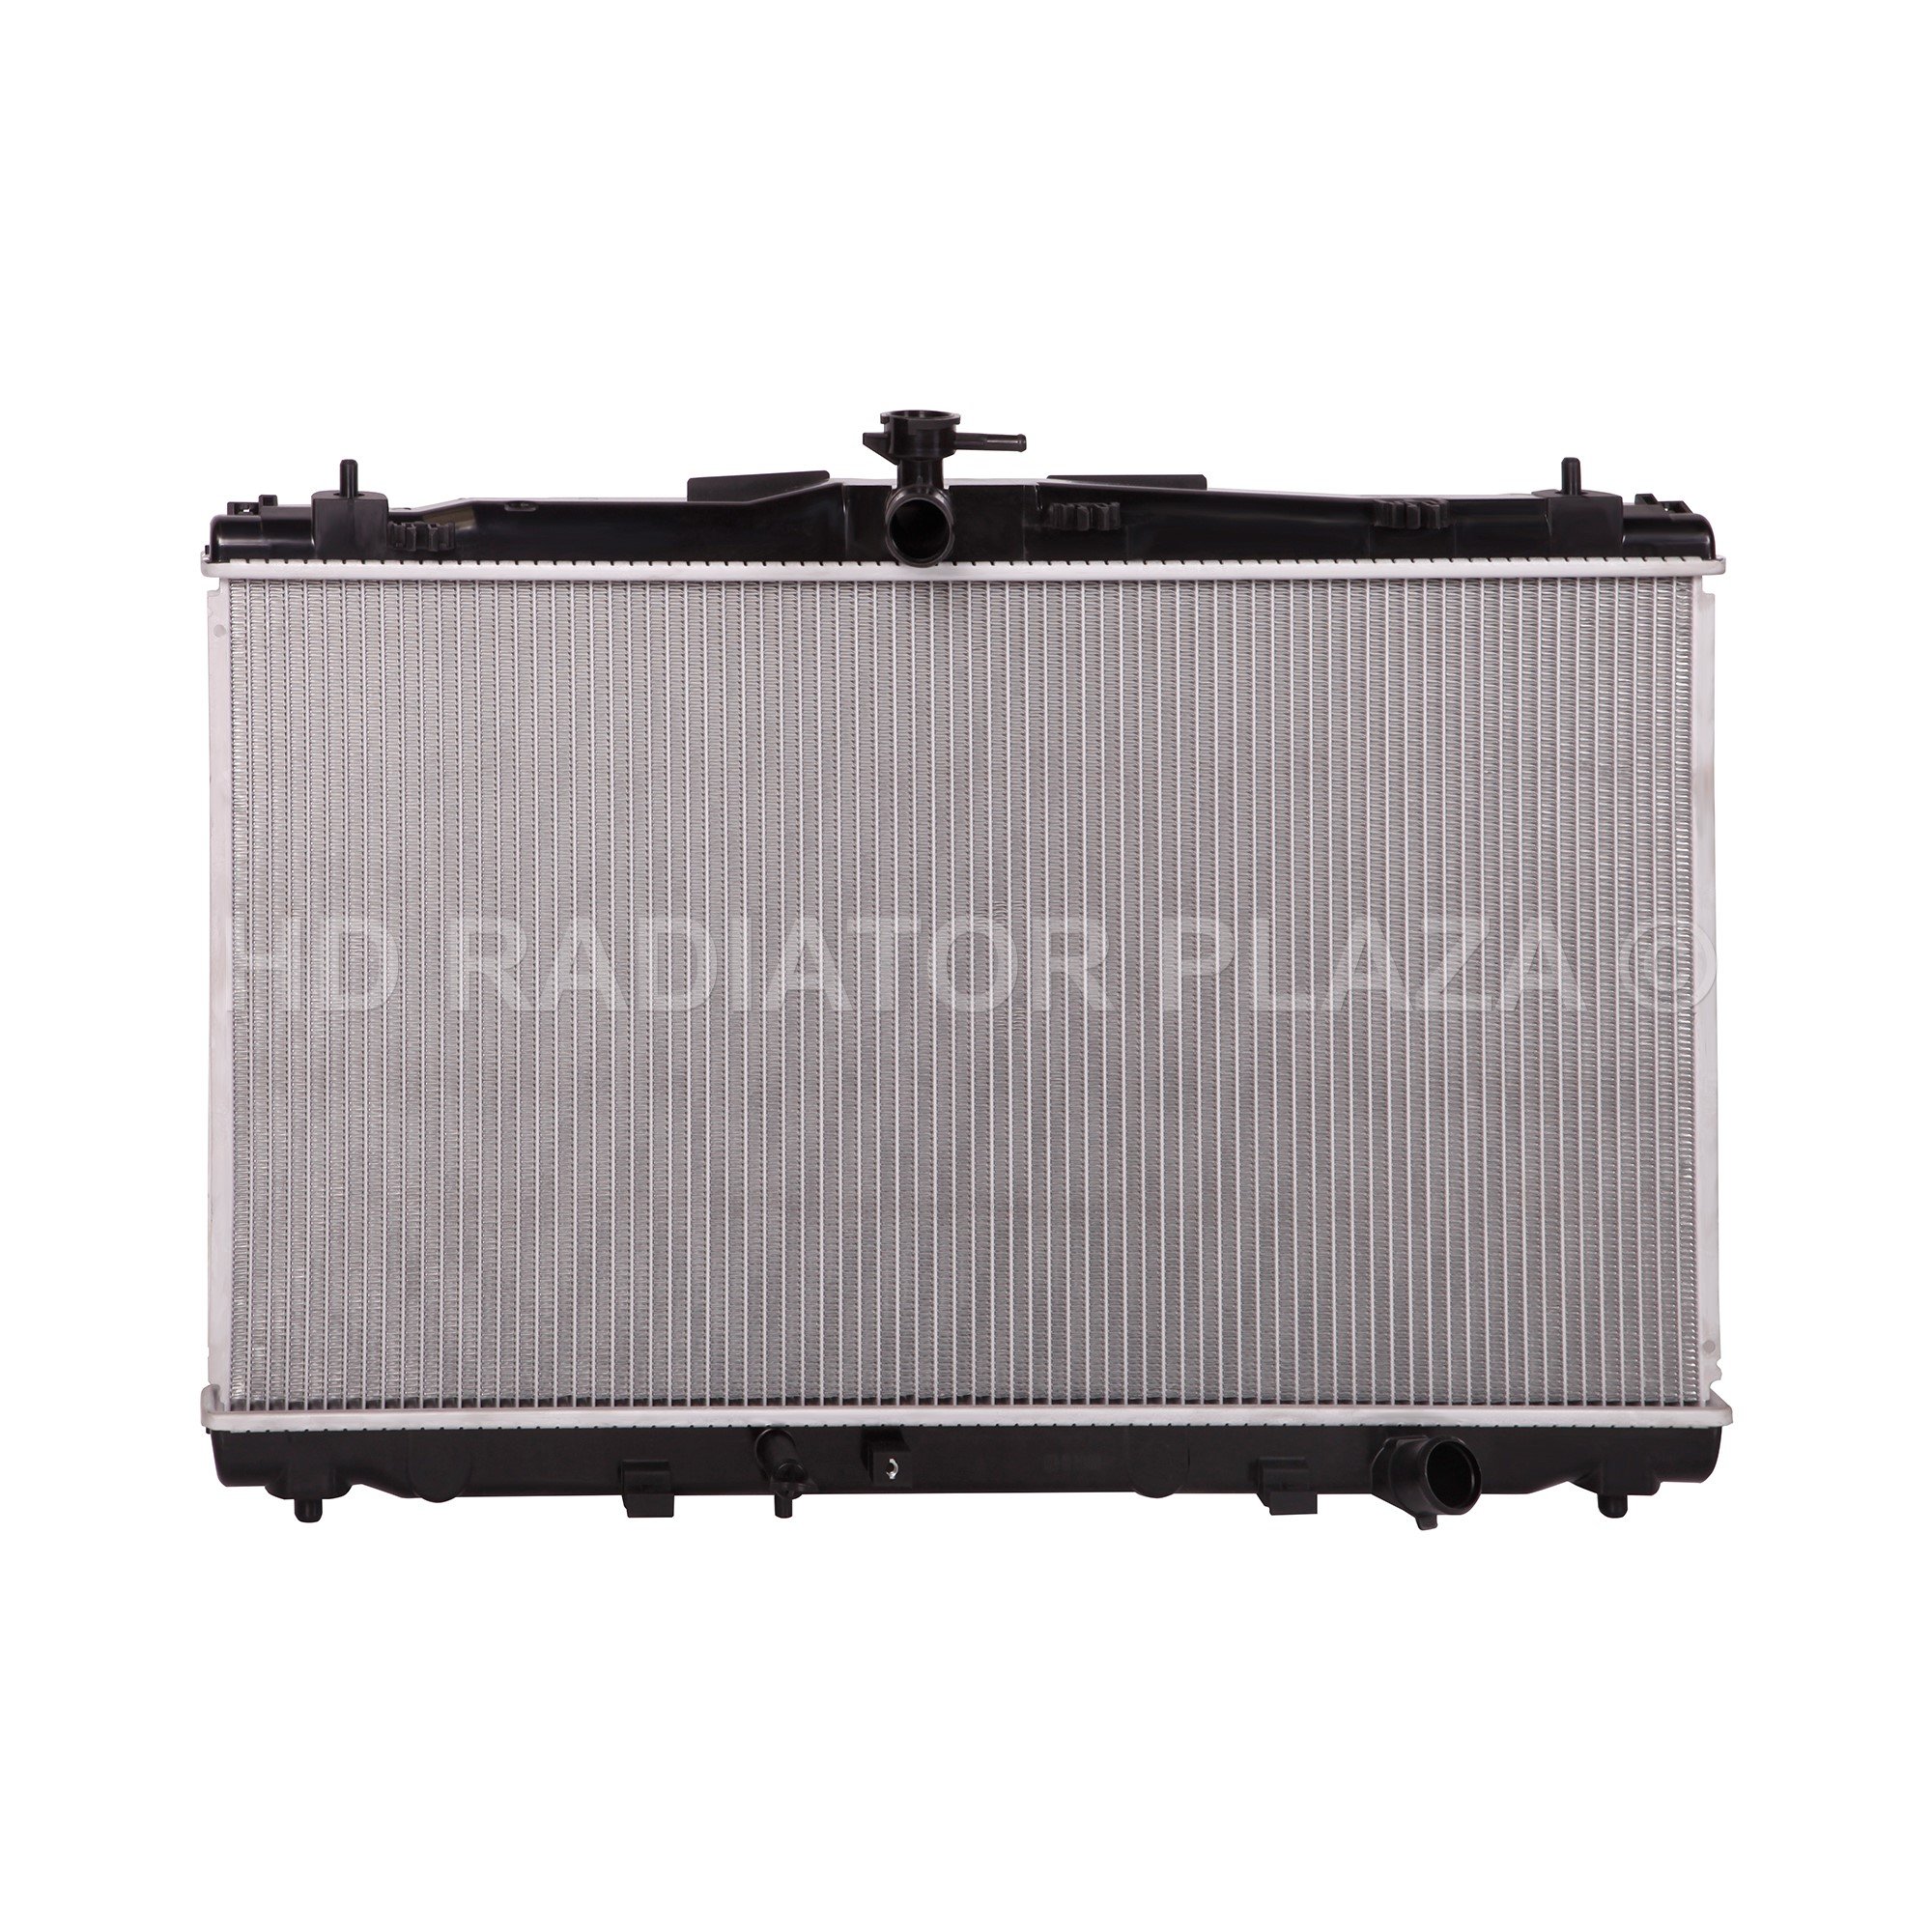 13270 - RADIATOR  - SUPERSEDED TO 13269